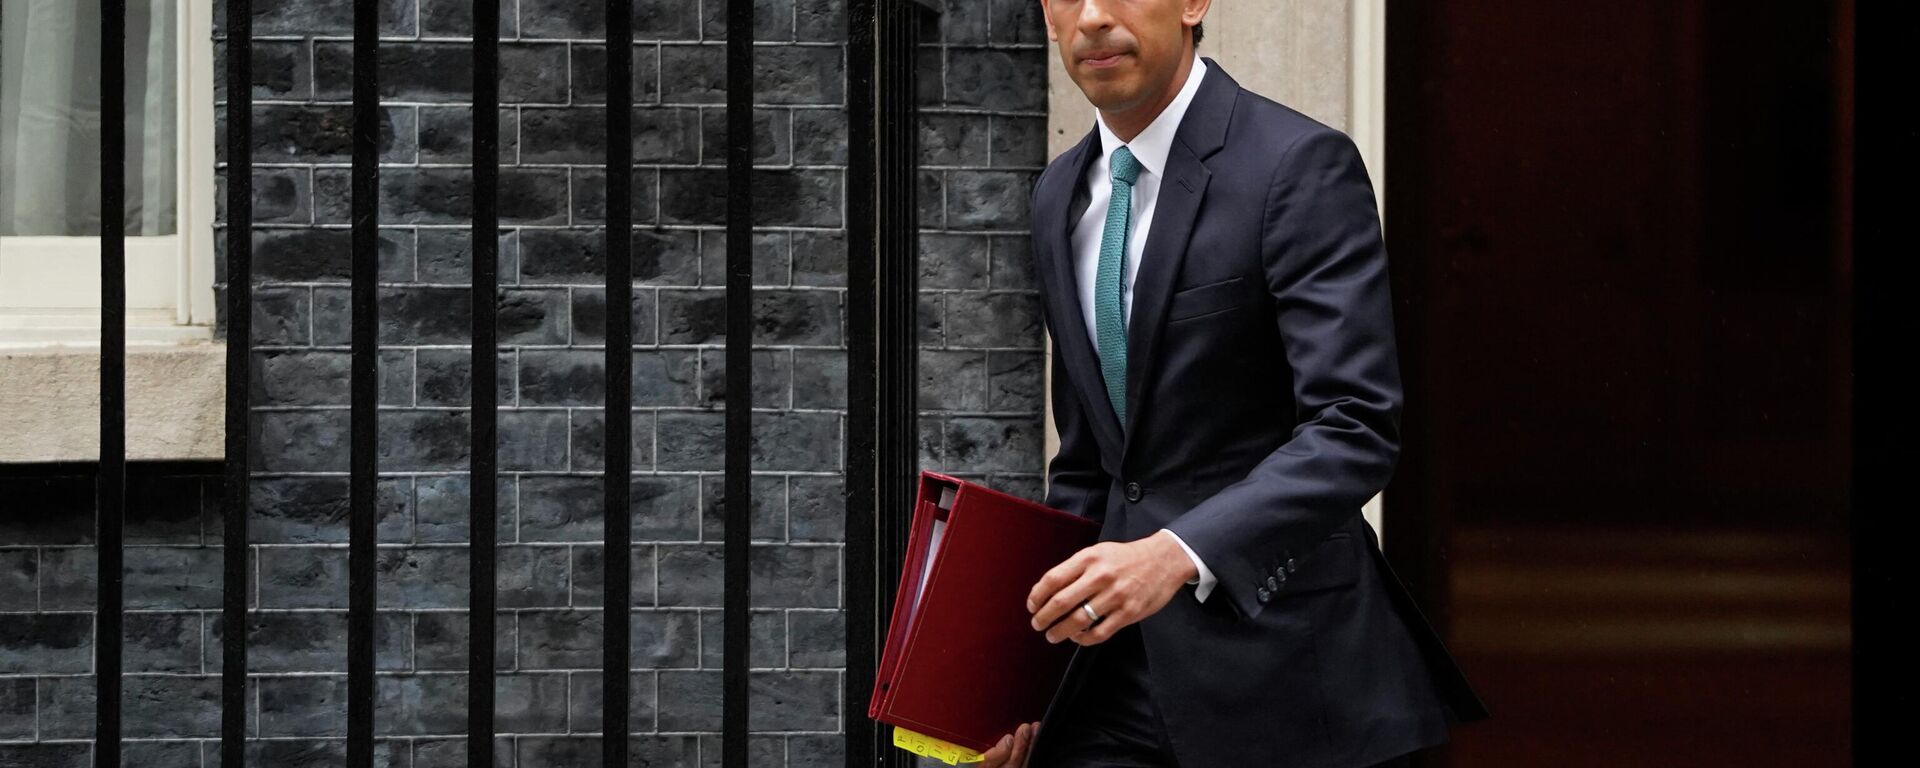 Britain's Prime Minister Rishi Sunak leaves 10 Downing Street in central London on October 26, 2022, for the House of Commons to take part in his first Prime Minister's Questions (PMQs). - Sputnik International, 1920, 14.11.2022